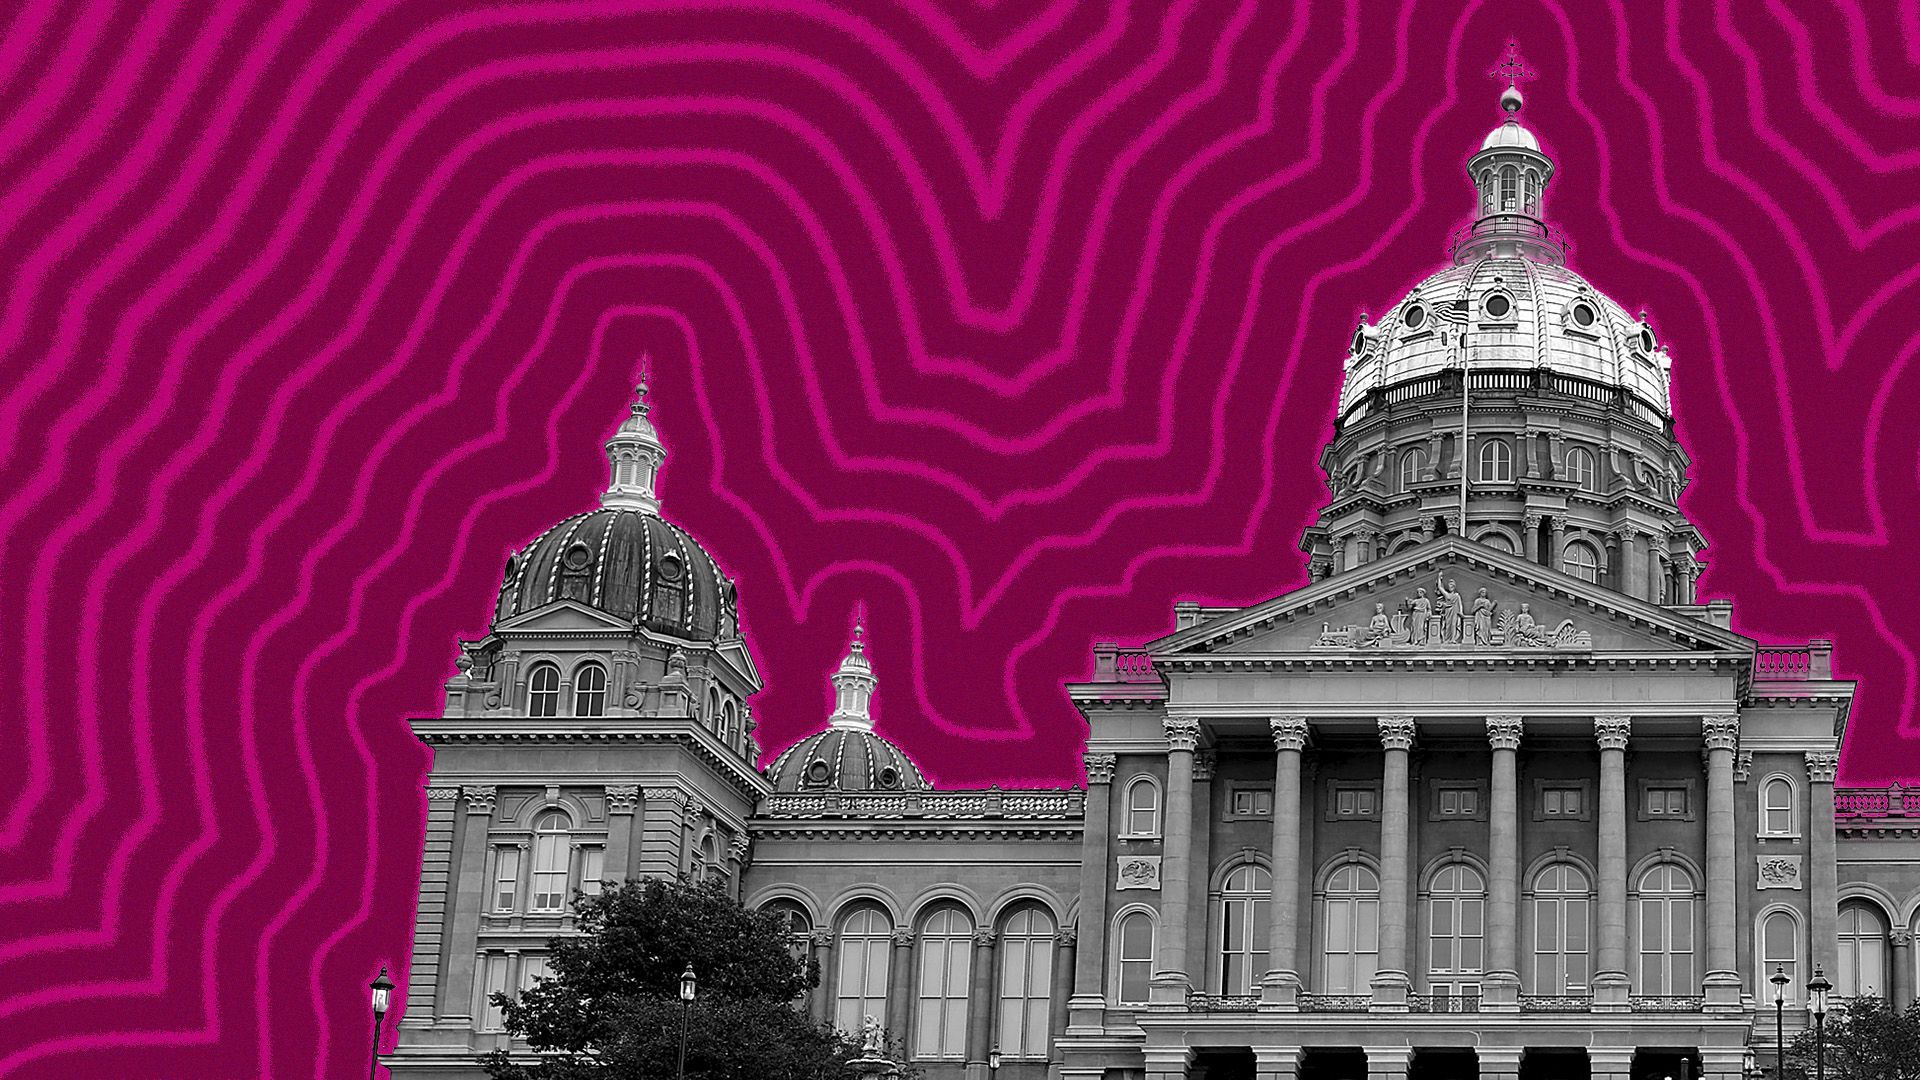 Illustration of the Iowa State Capitol building with lines radiating from it.